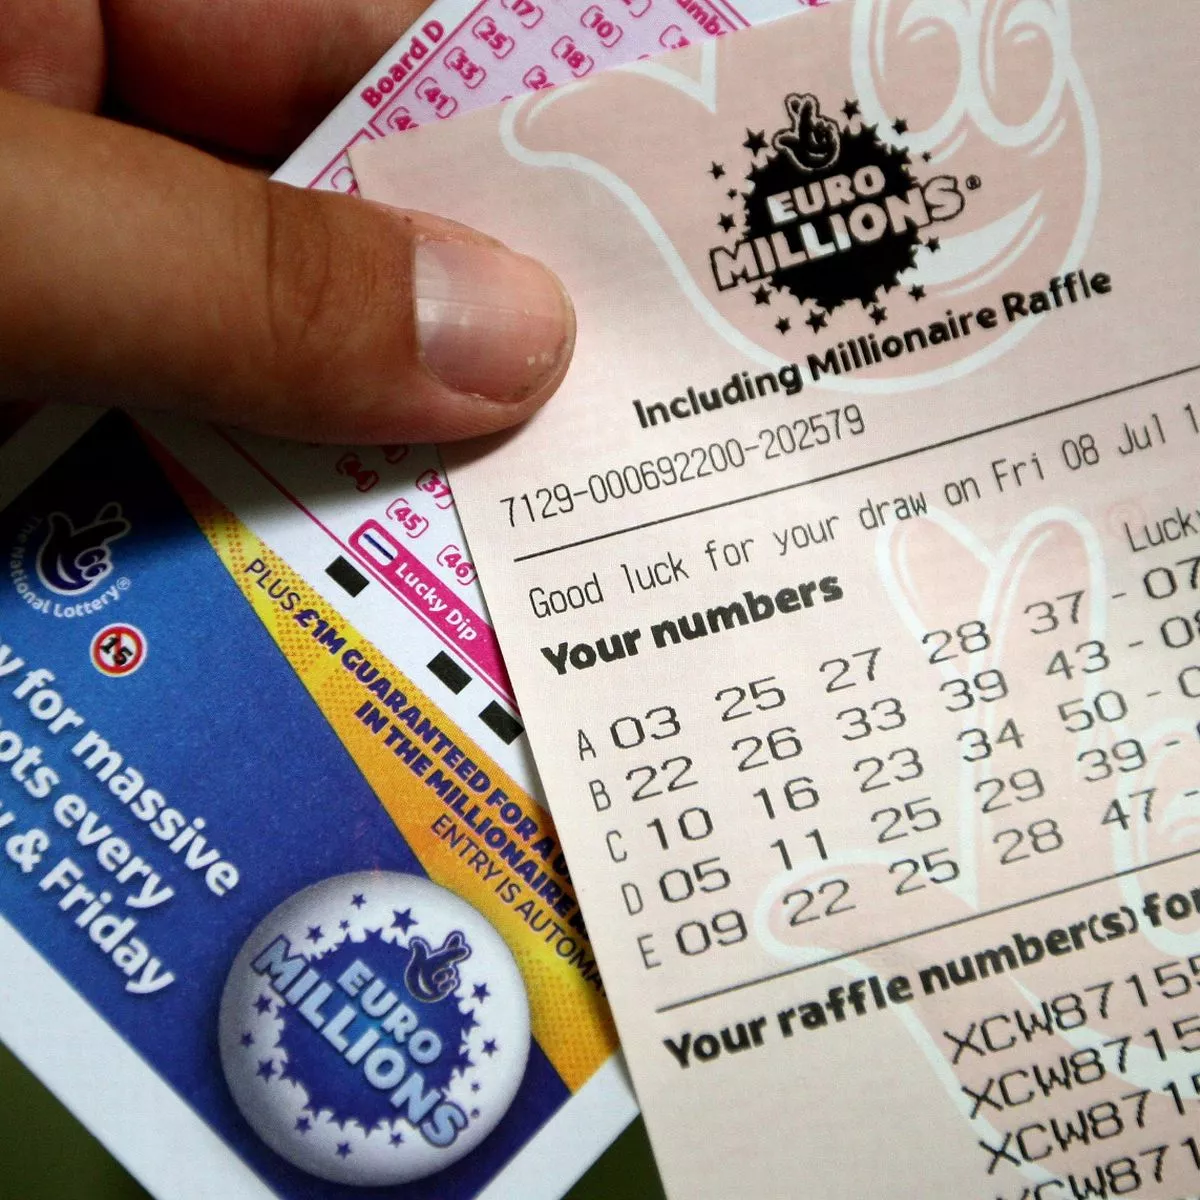 euromillions recent numbers